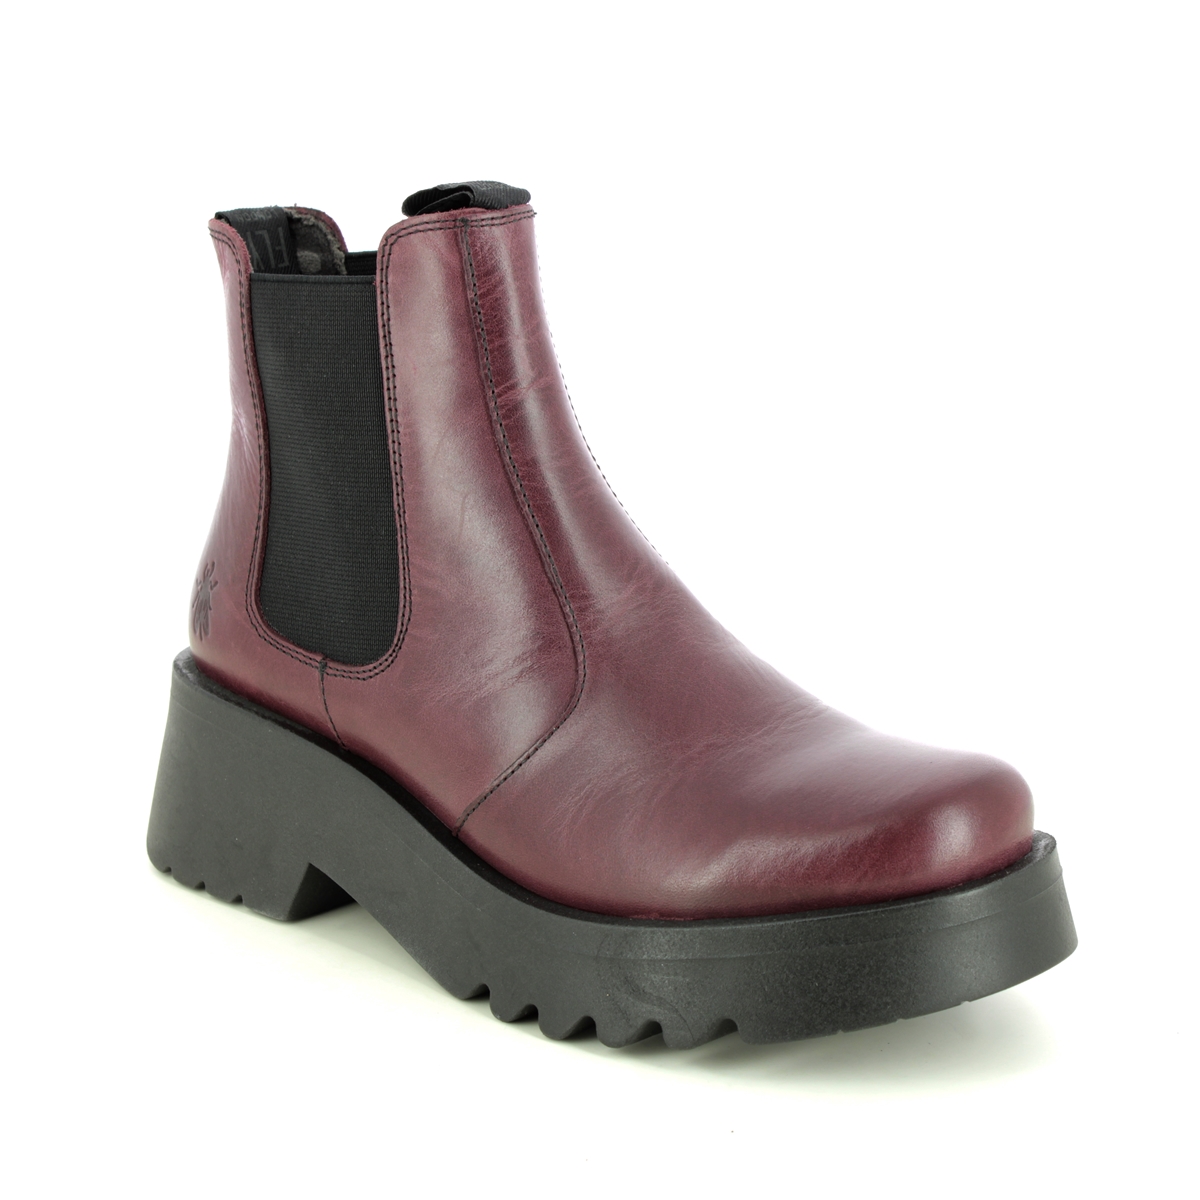 Fly London Medi  Midland Purple Leather Womens Chelsea Boots P144789-002 in a Plain Leather in Size 42